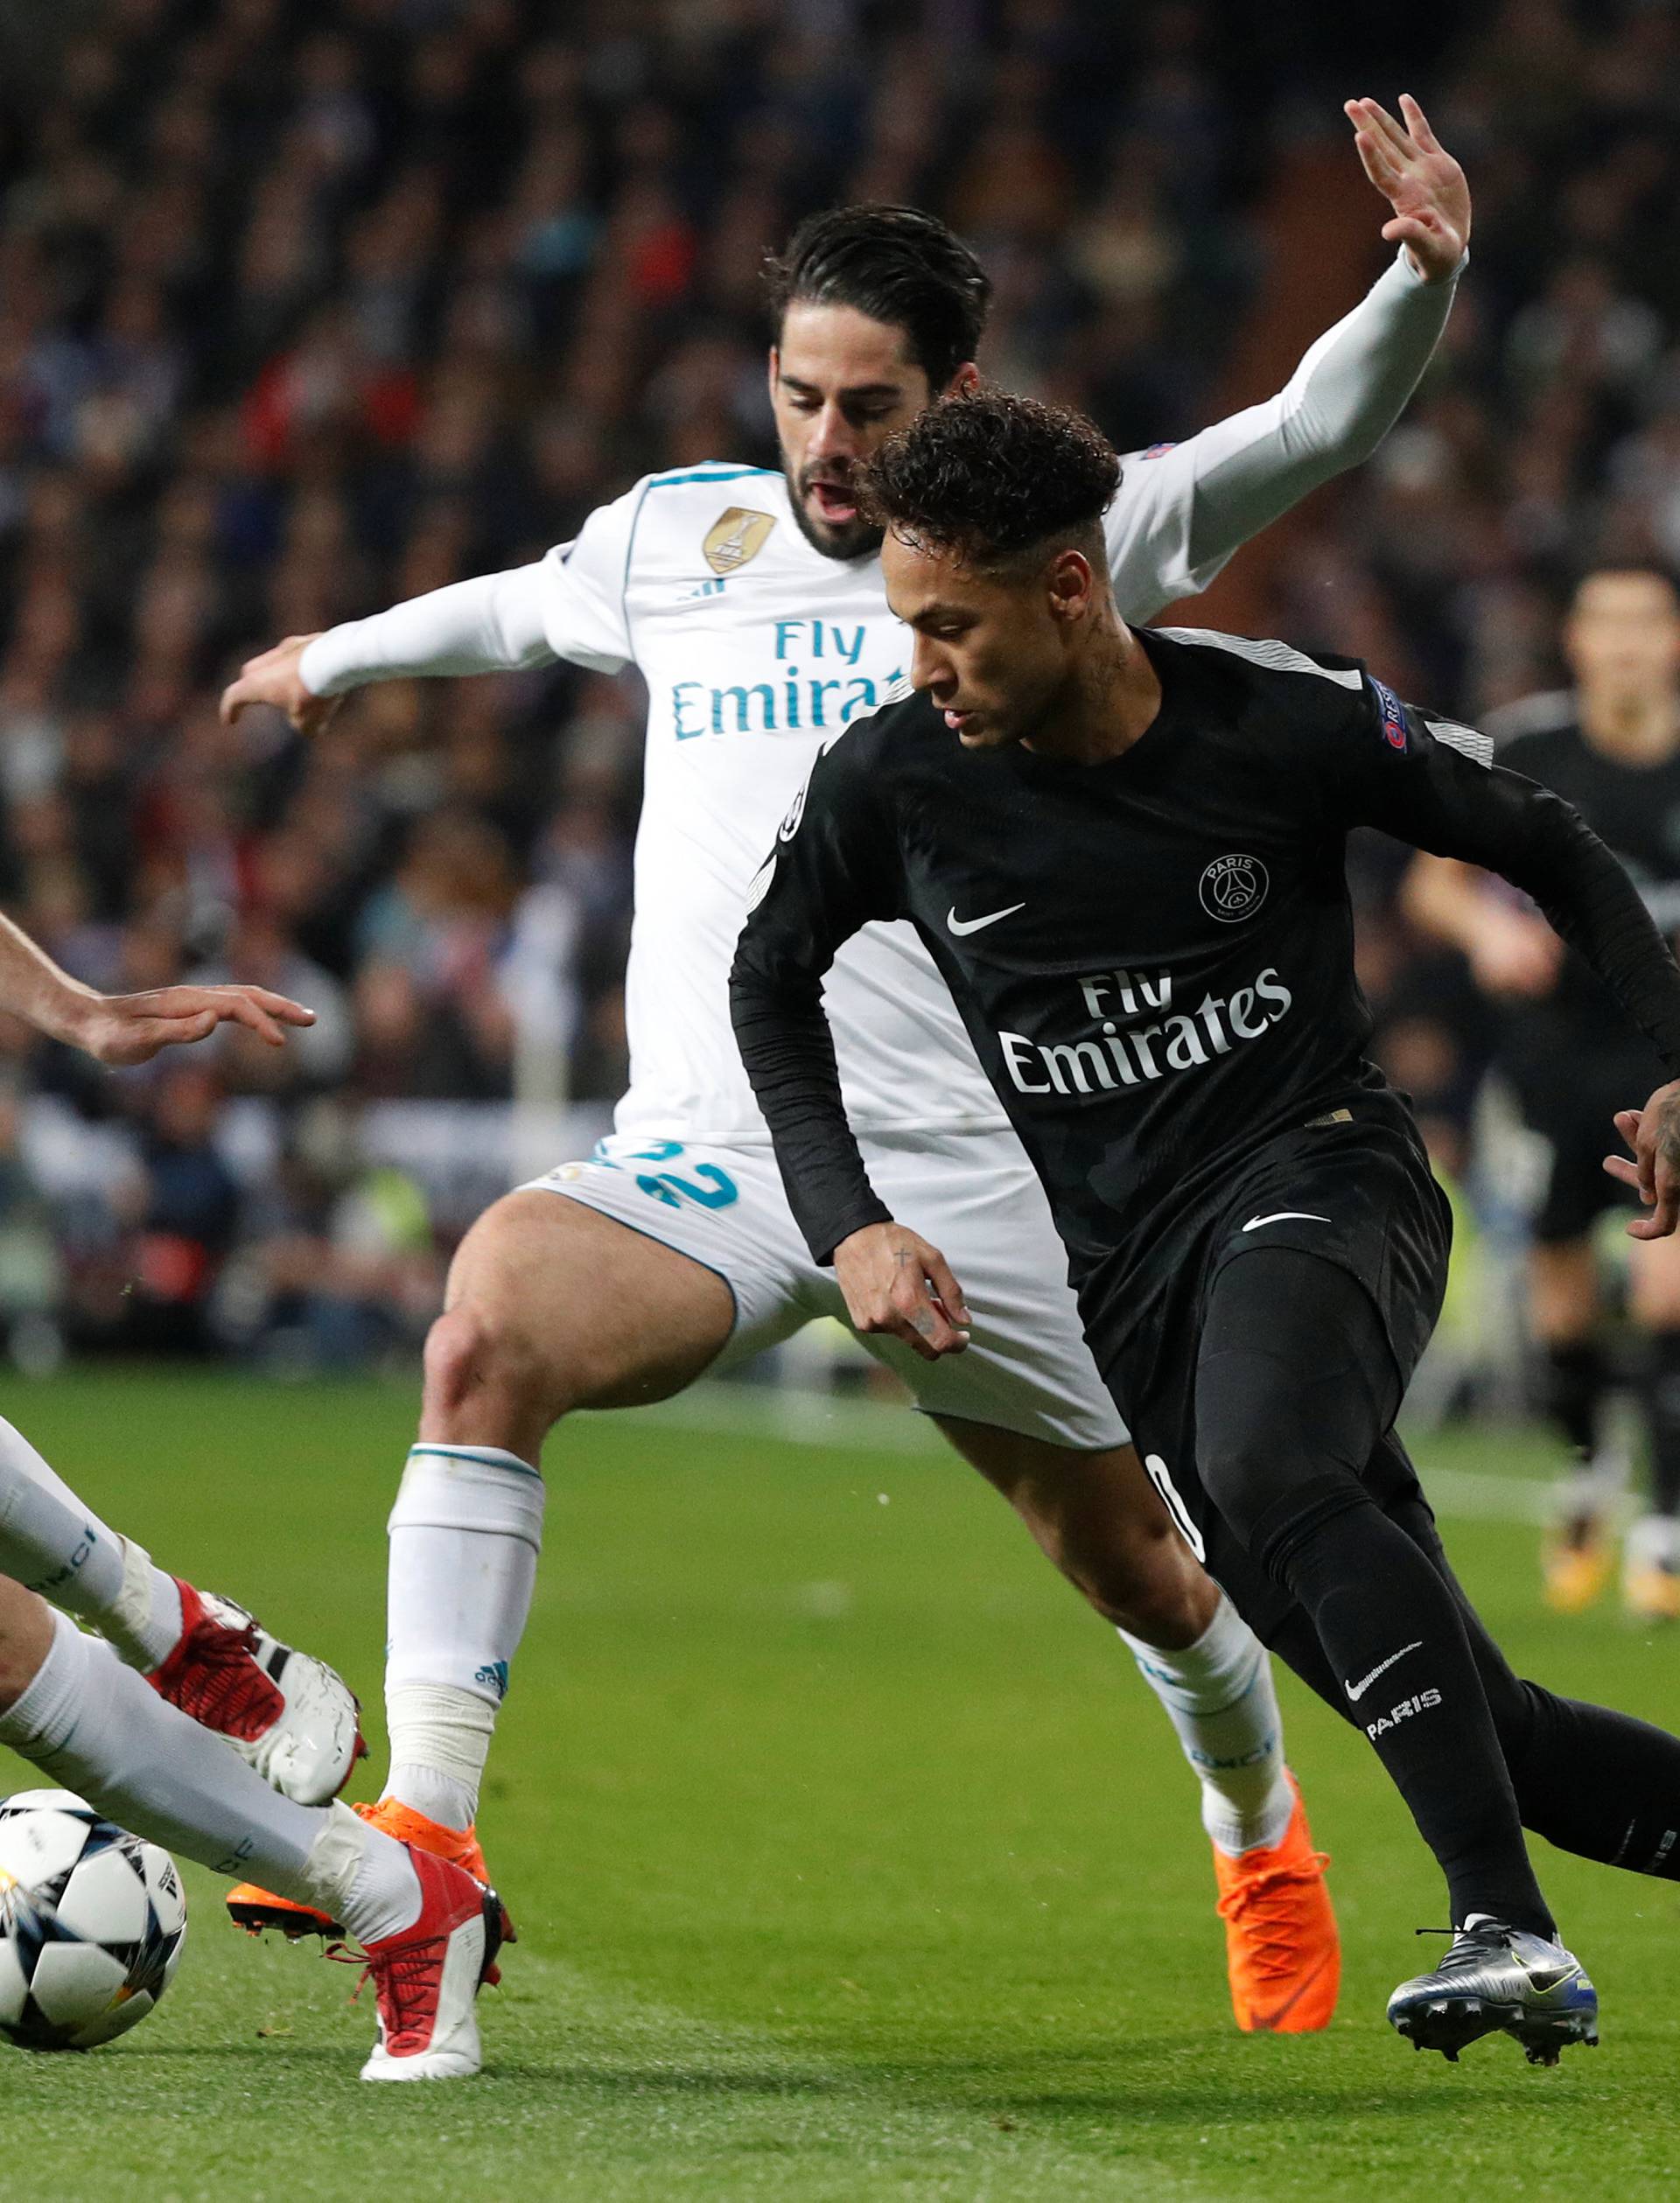 Champions League Round of 16 First Leg - Real Madrid vs Paris St Germain